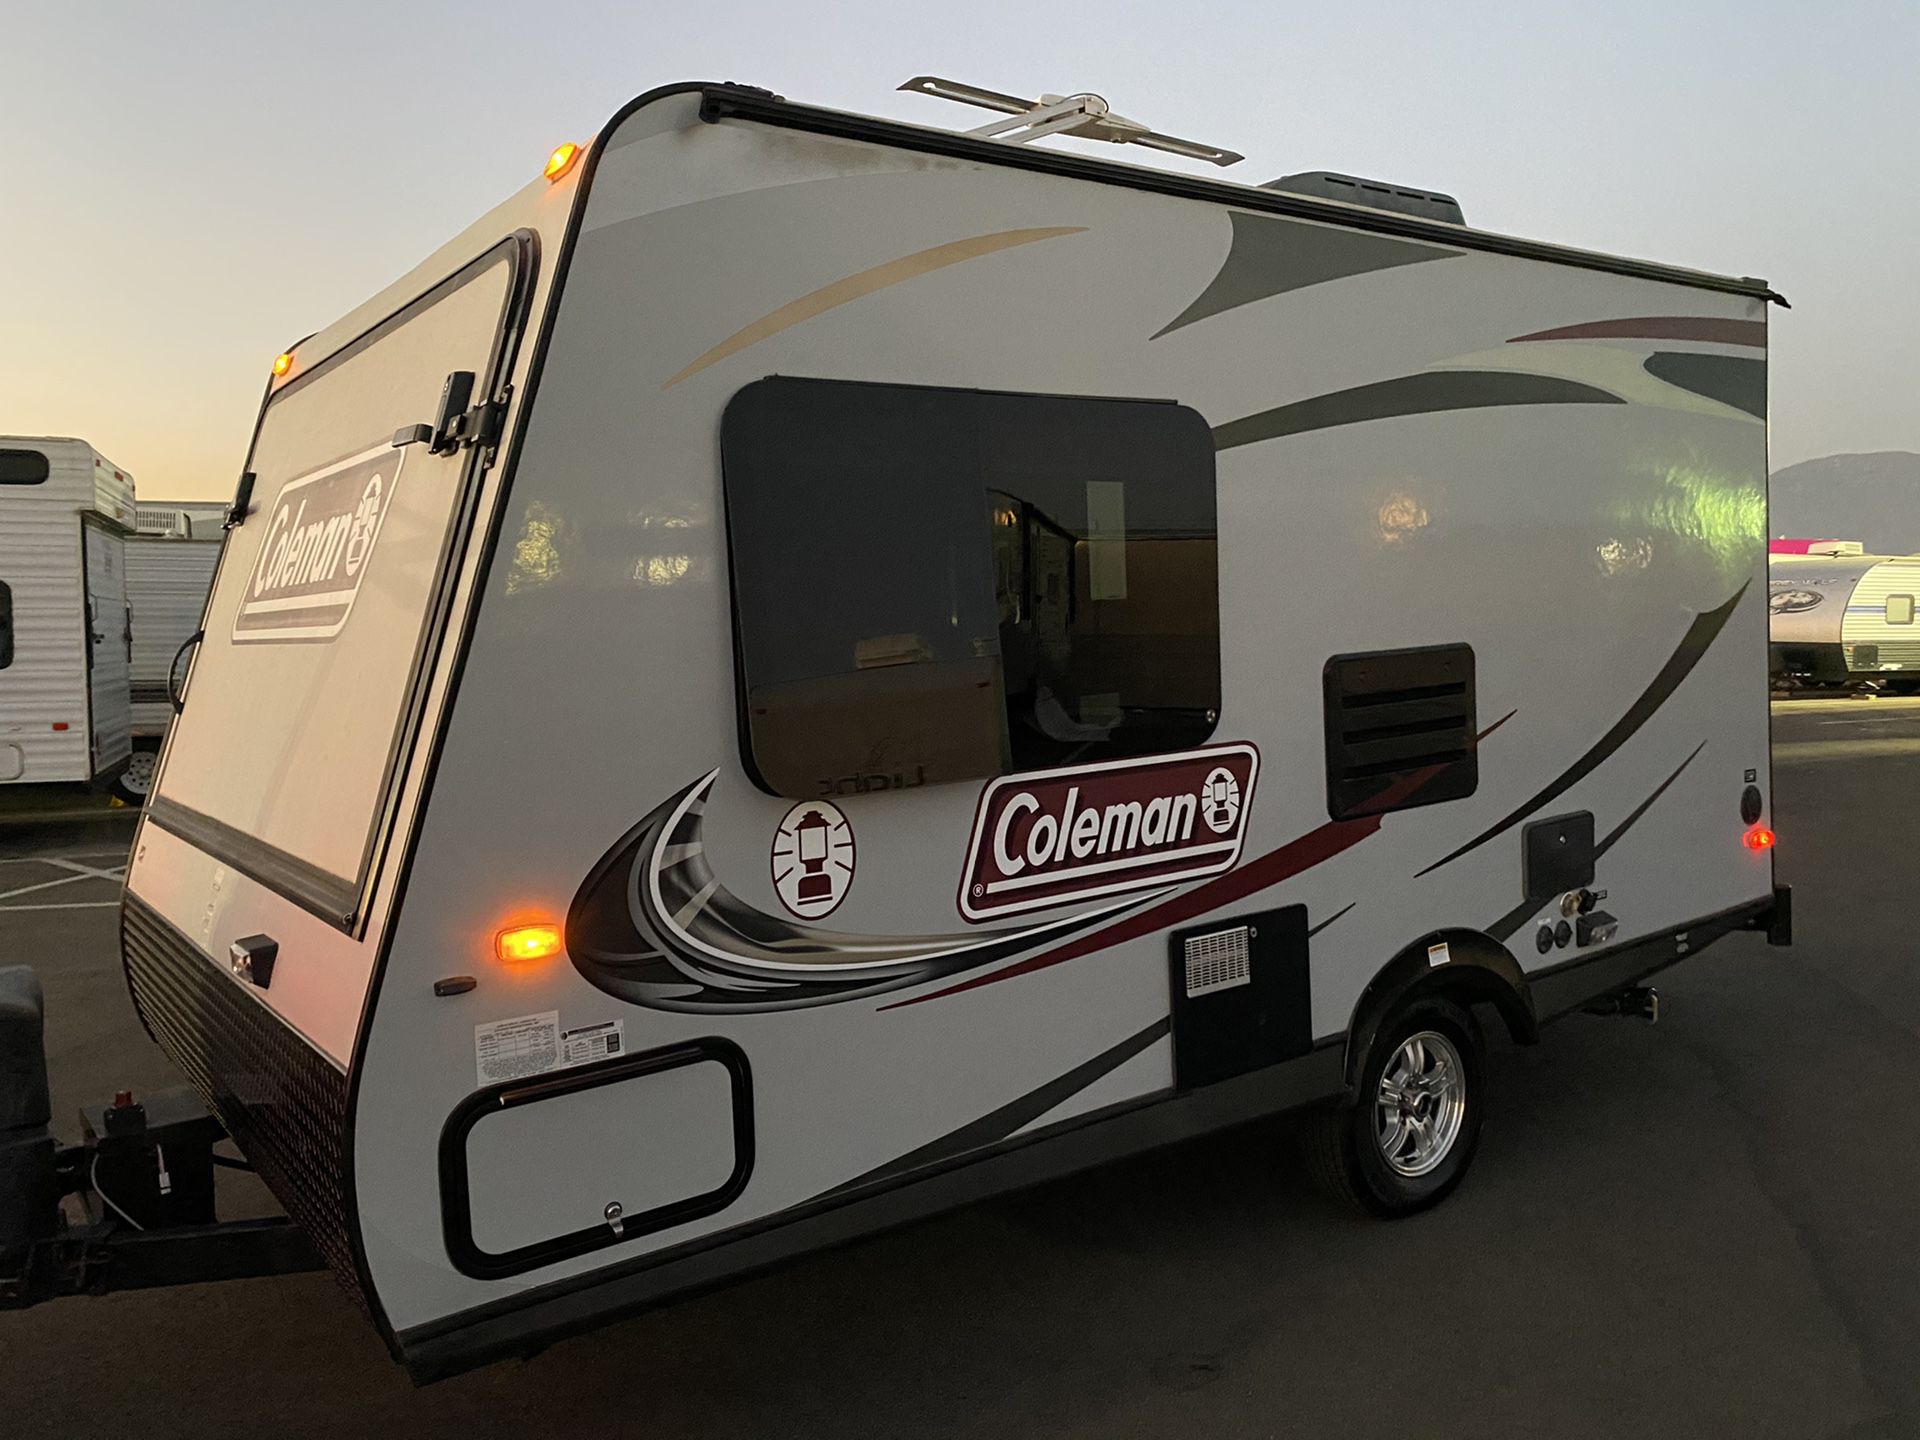 2014 ColeMan Explorer 15FT 2 bed tip outs and A/c Easy to tow